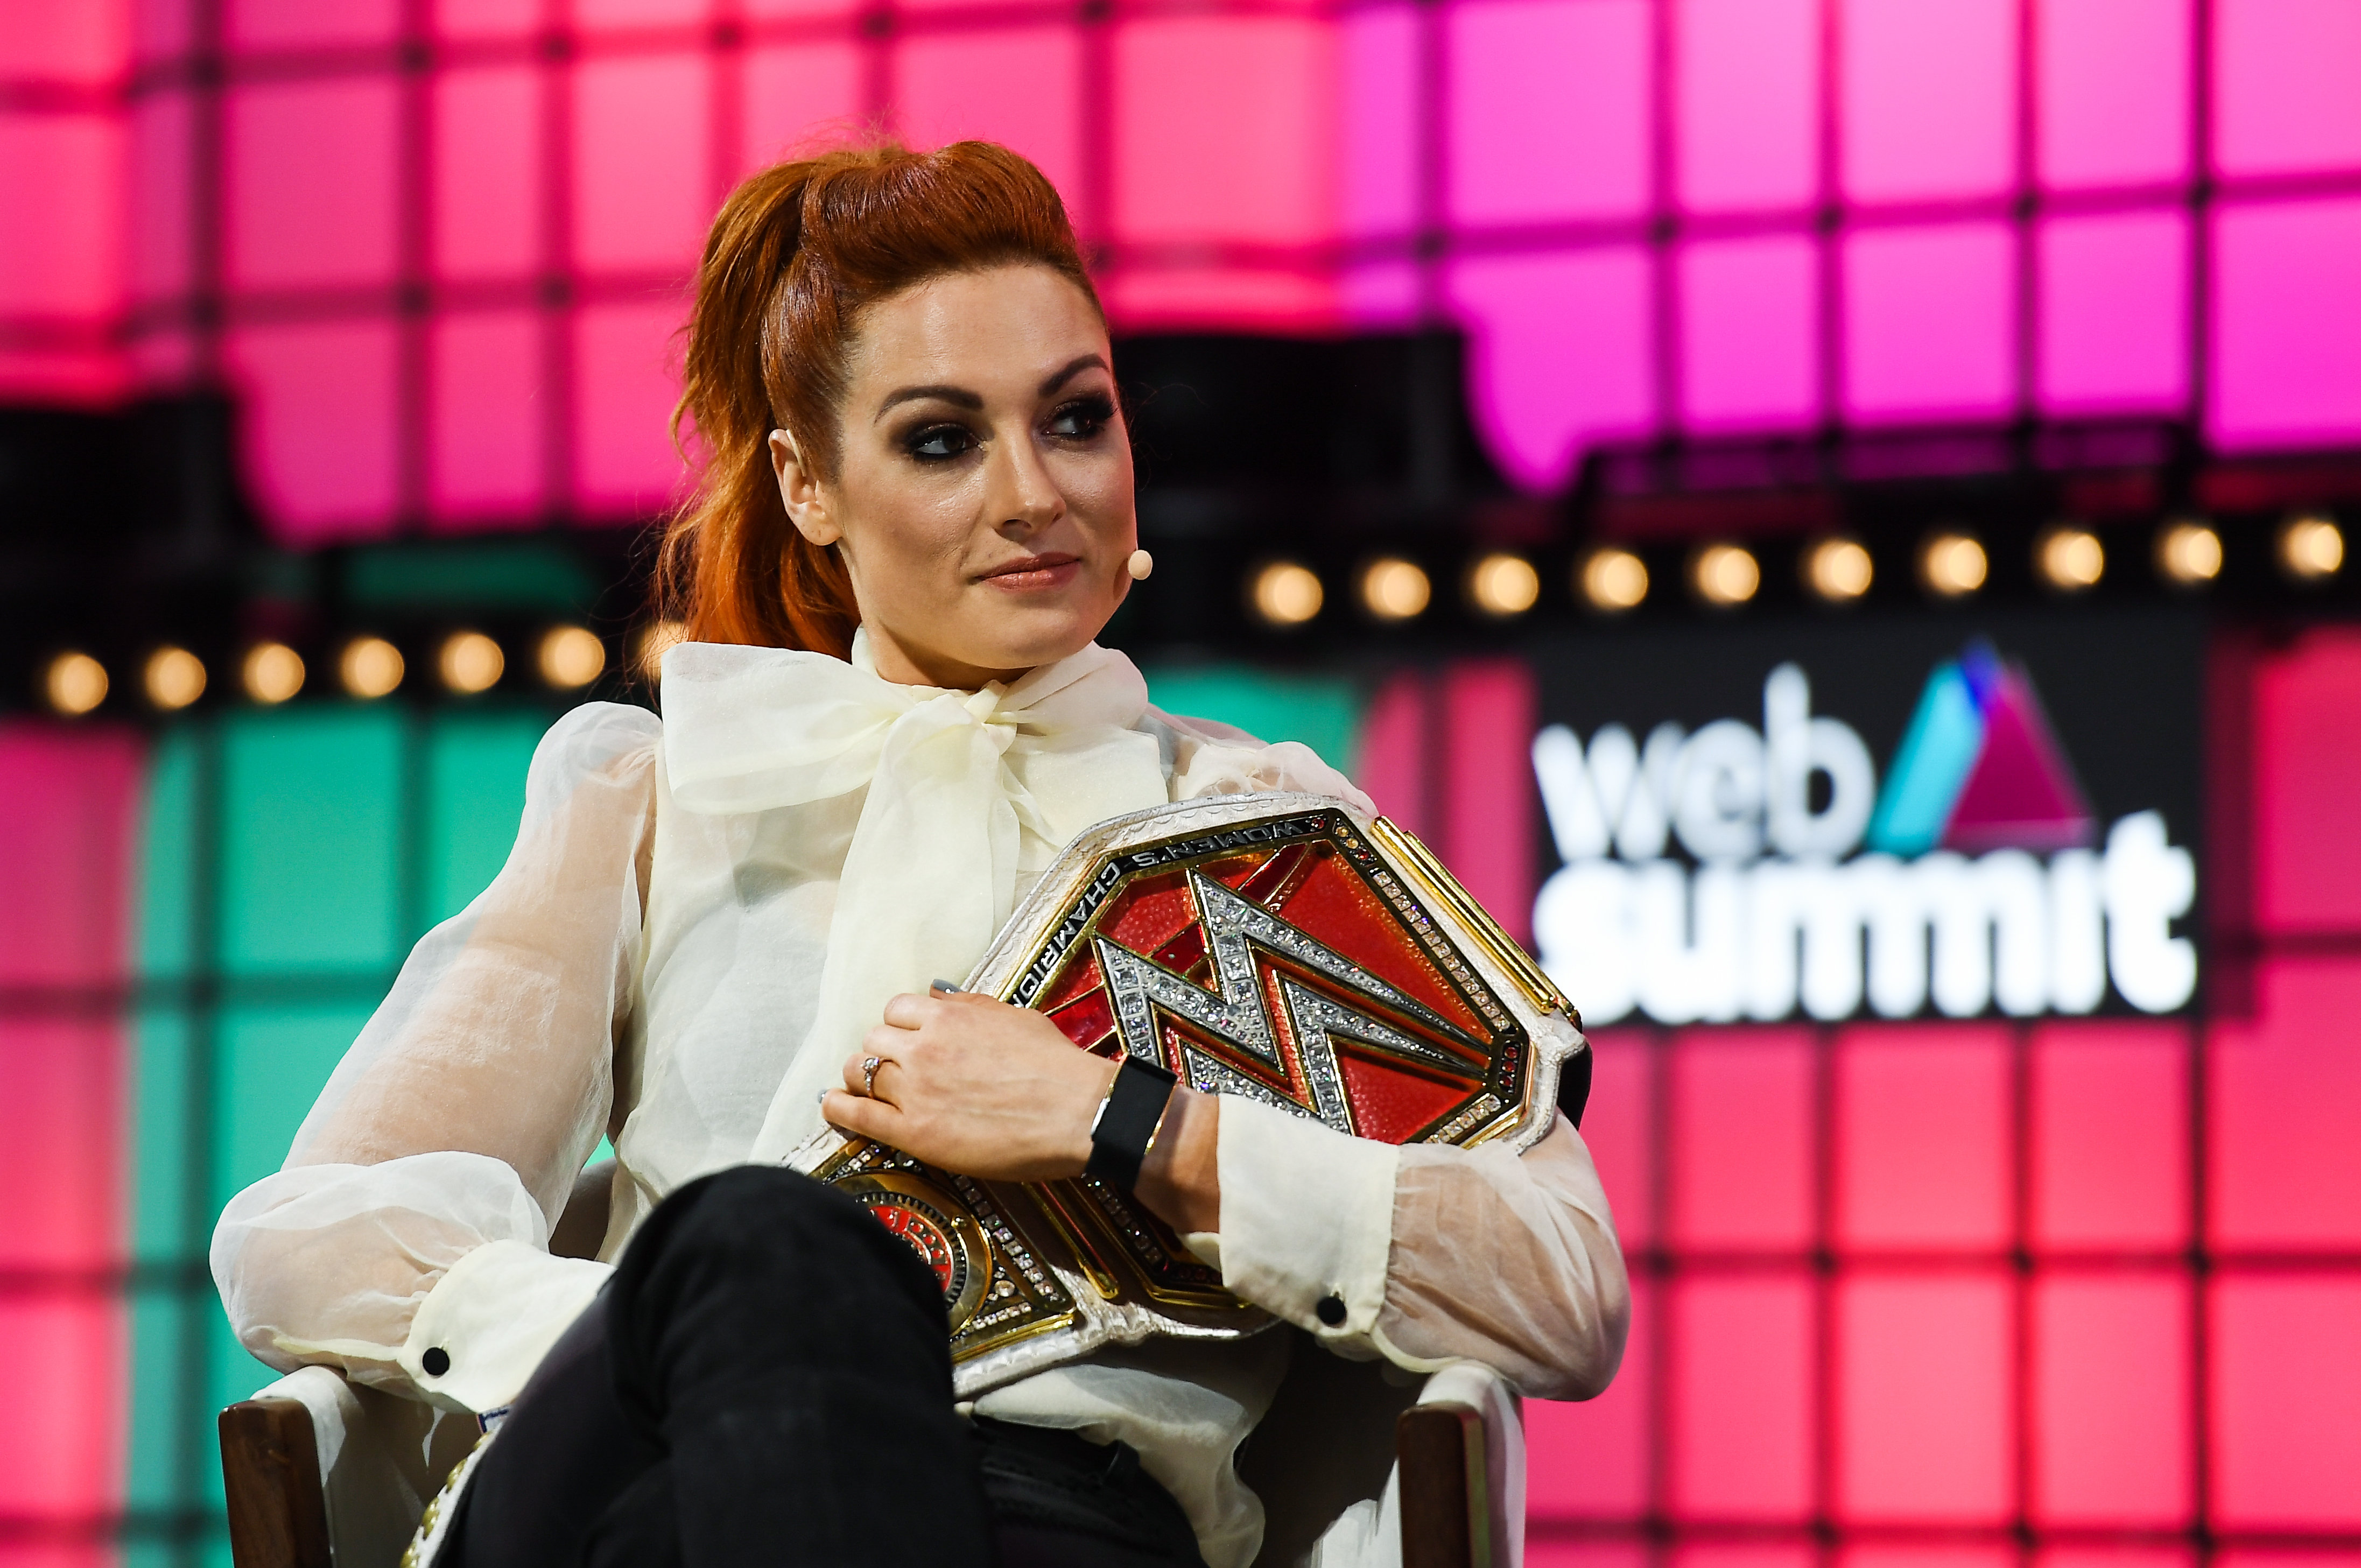 10 Fascinating WWE Backstage Facts About Becky Lynch